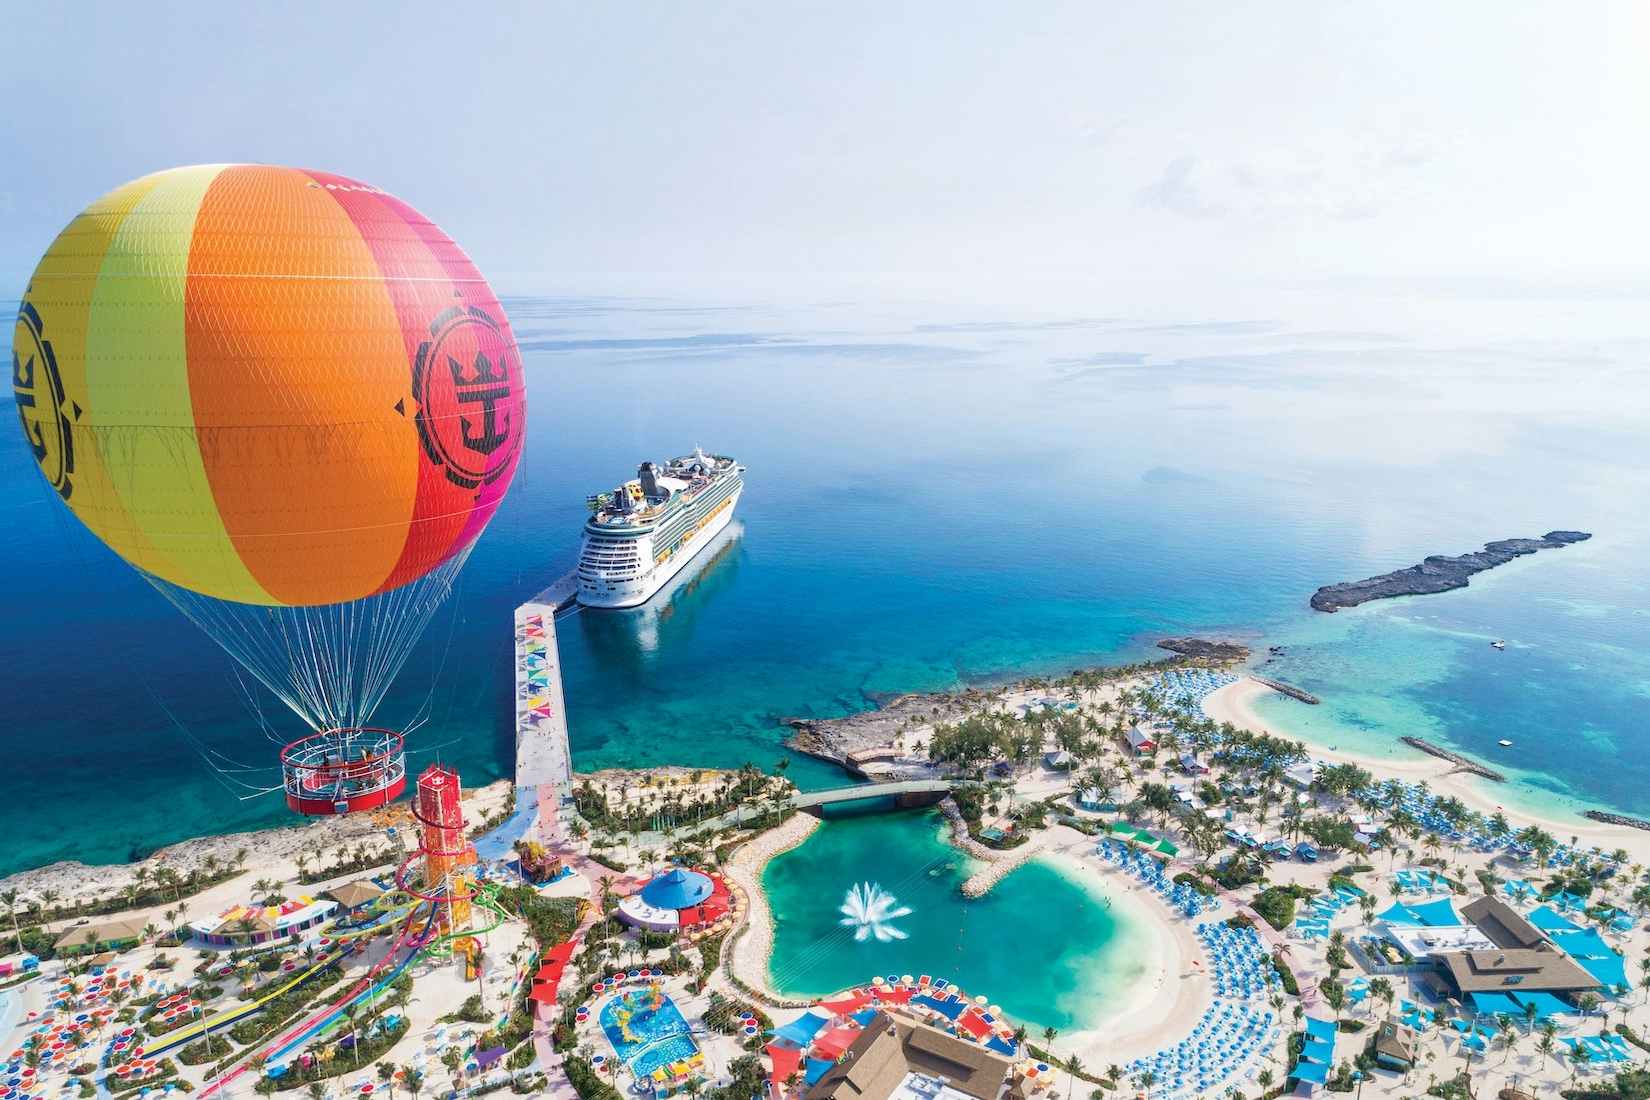 Aerial shot of coco cay with a hot air balloon in the foreground